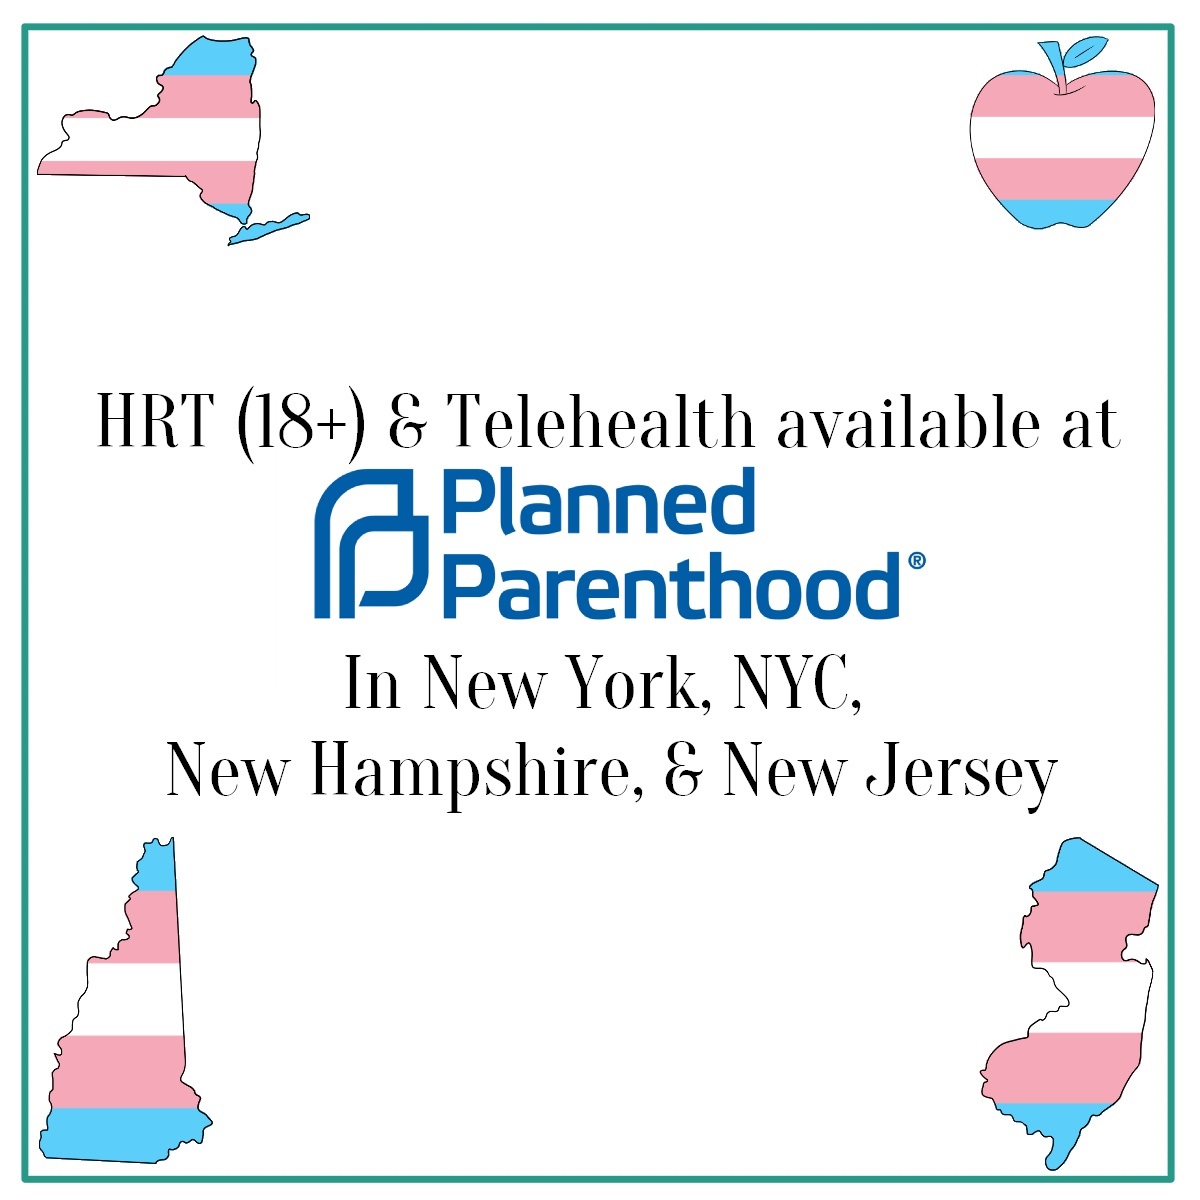 HRT and Help for Transgender Patients from Planned Parenthood in New Hampshire, New Jersey, NYC and New York